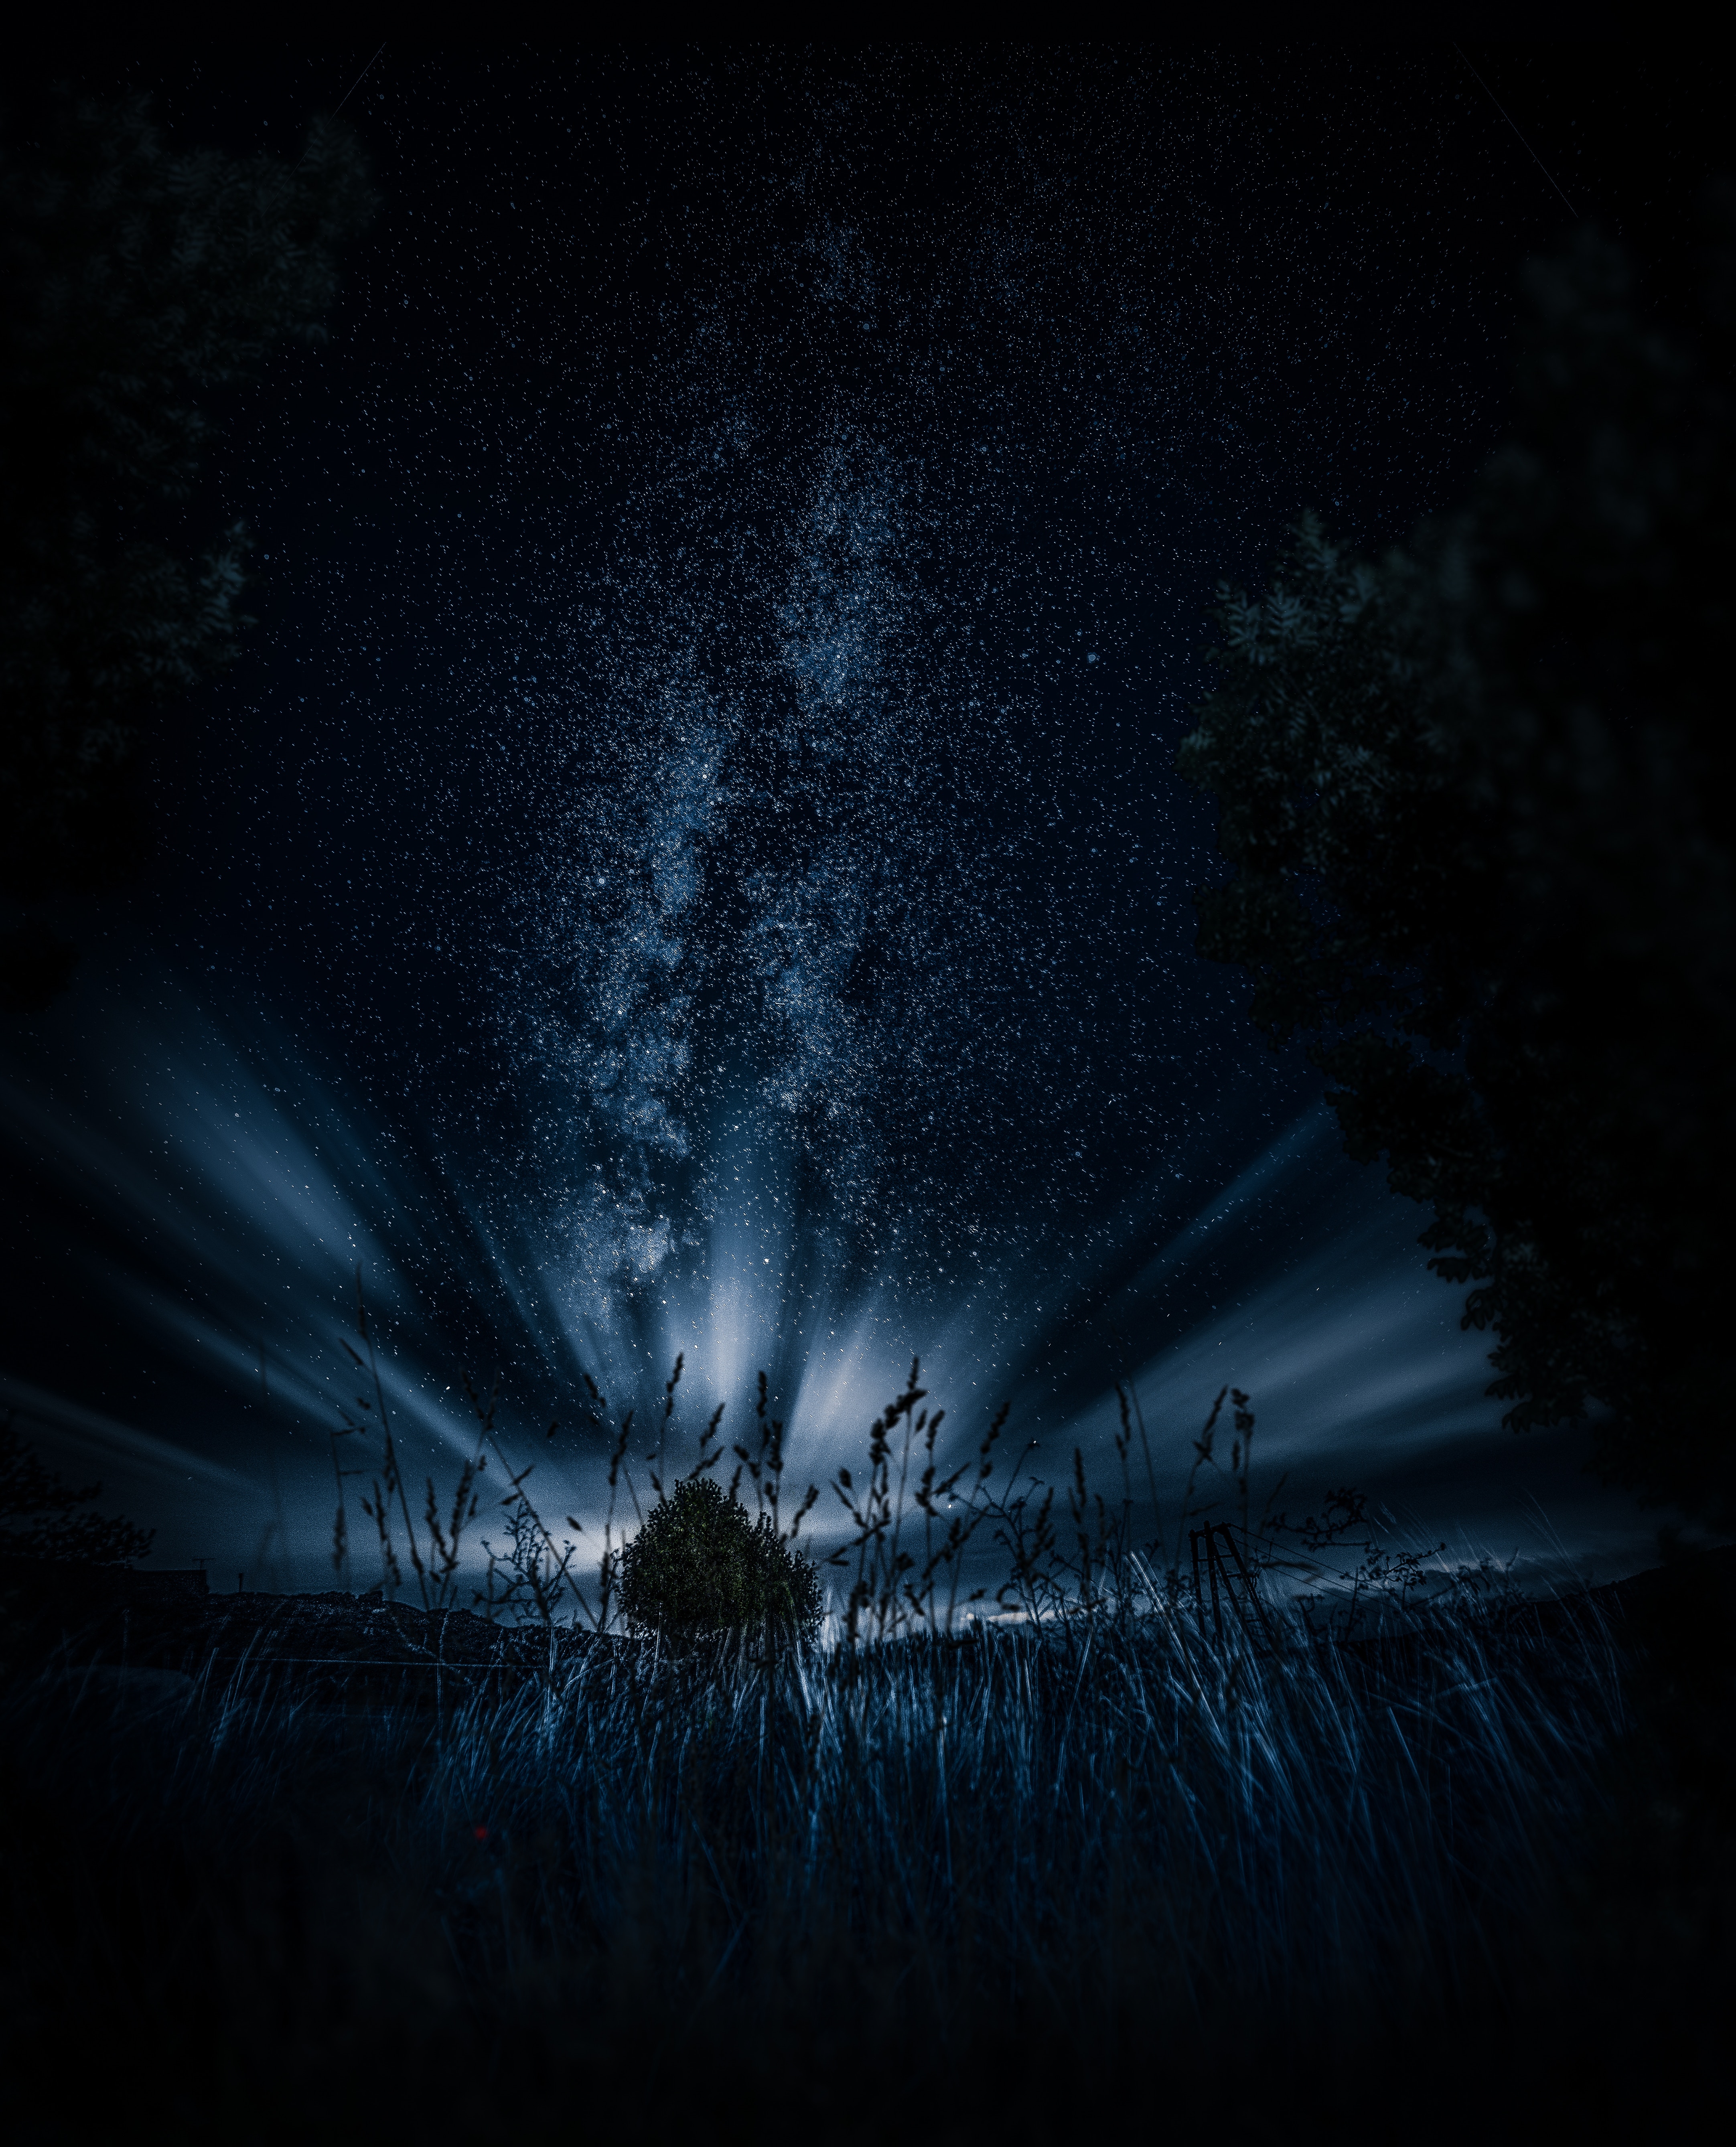 106784 2560x1080 PC pictures for free, download wood, dark, grass, night 2560x1080 wallpapers on your desktop